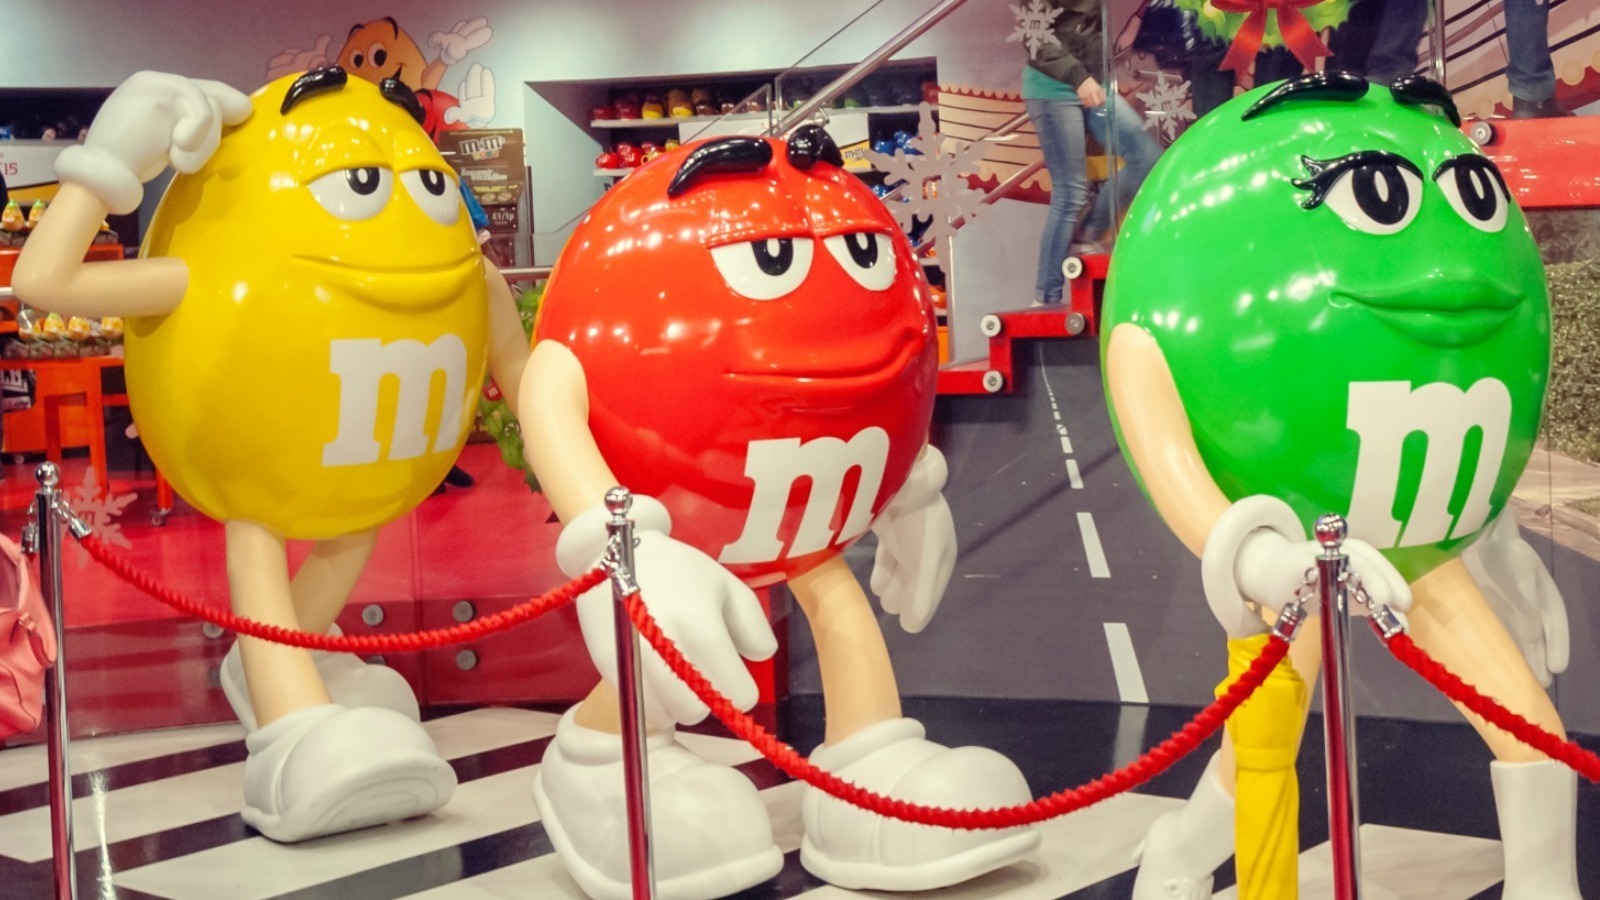 M&Ms characters evolving to be more inclusive: Green is 'much more